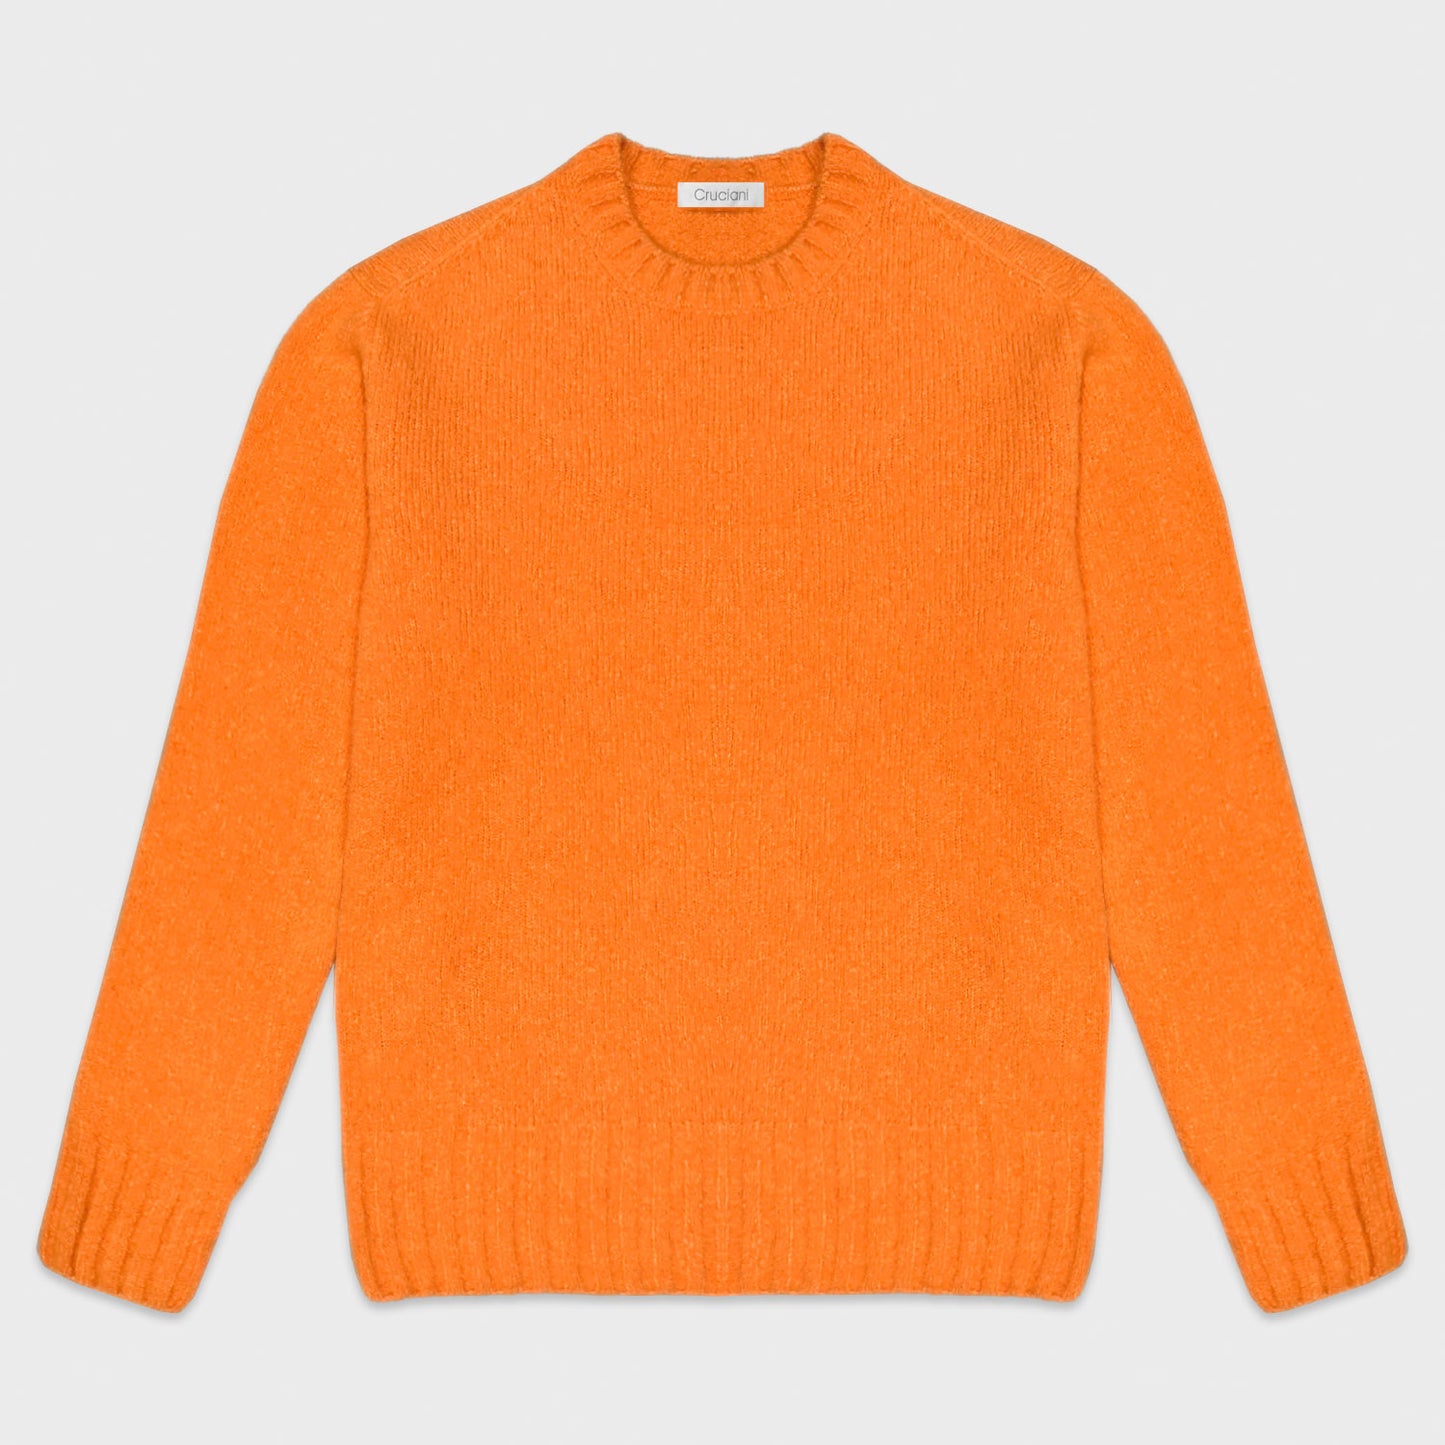 Load image into Gallery viewer, Pumpkin Orange Shetland Wool Crewneck Sweater Cruciani. Cool pumpkin orange sweater made with shetland wool, not hispid knit to the touch a luxurious reinterpretation of the traditional Scottish Shetland sweater, made in Italy by Cruciani
